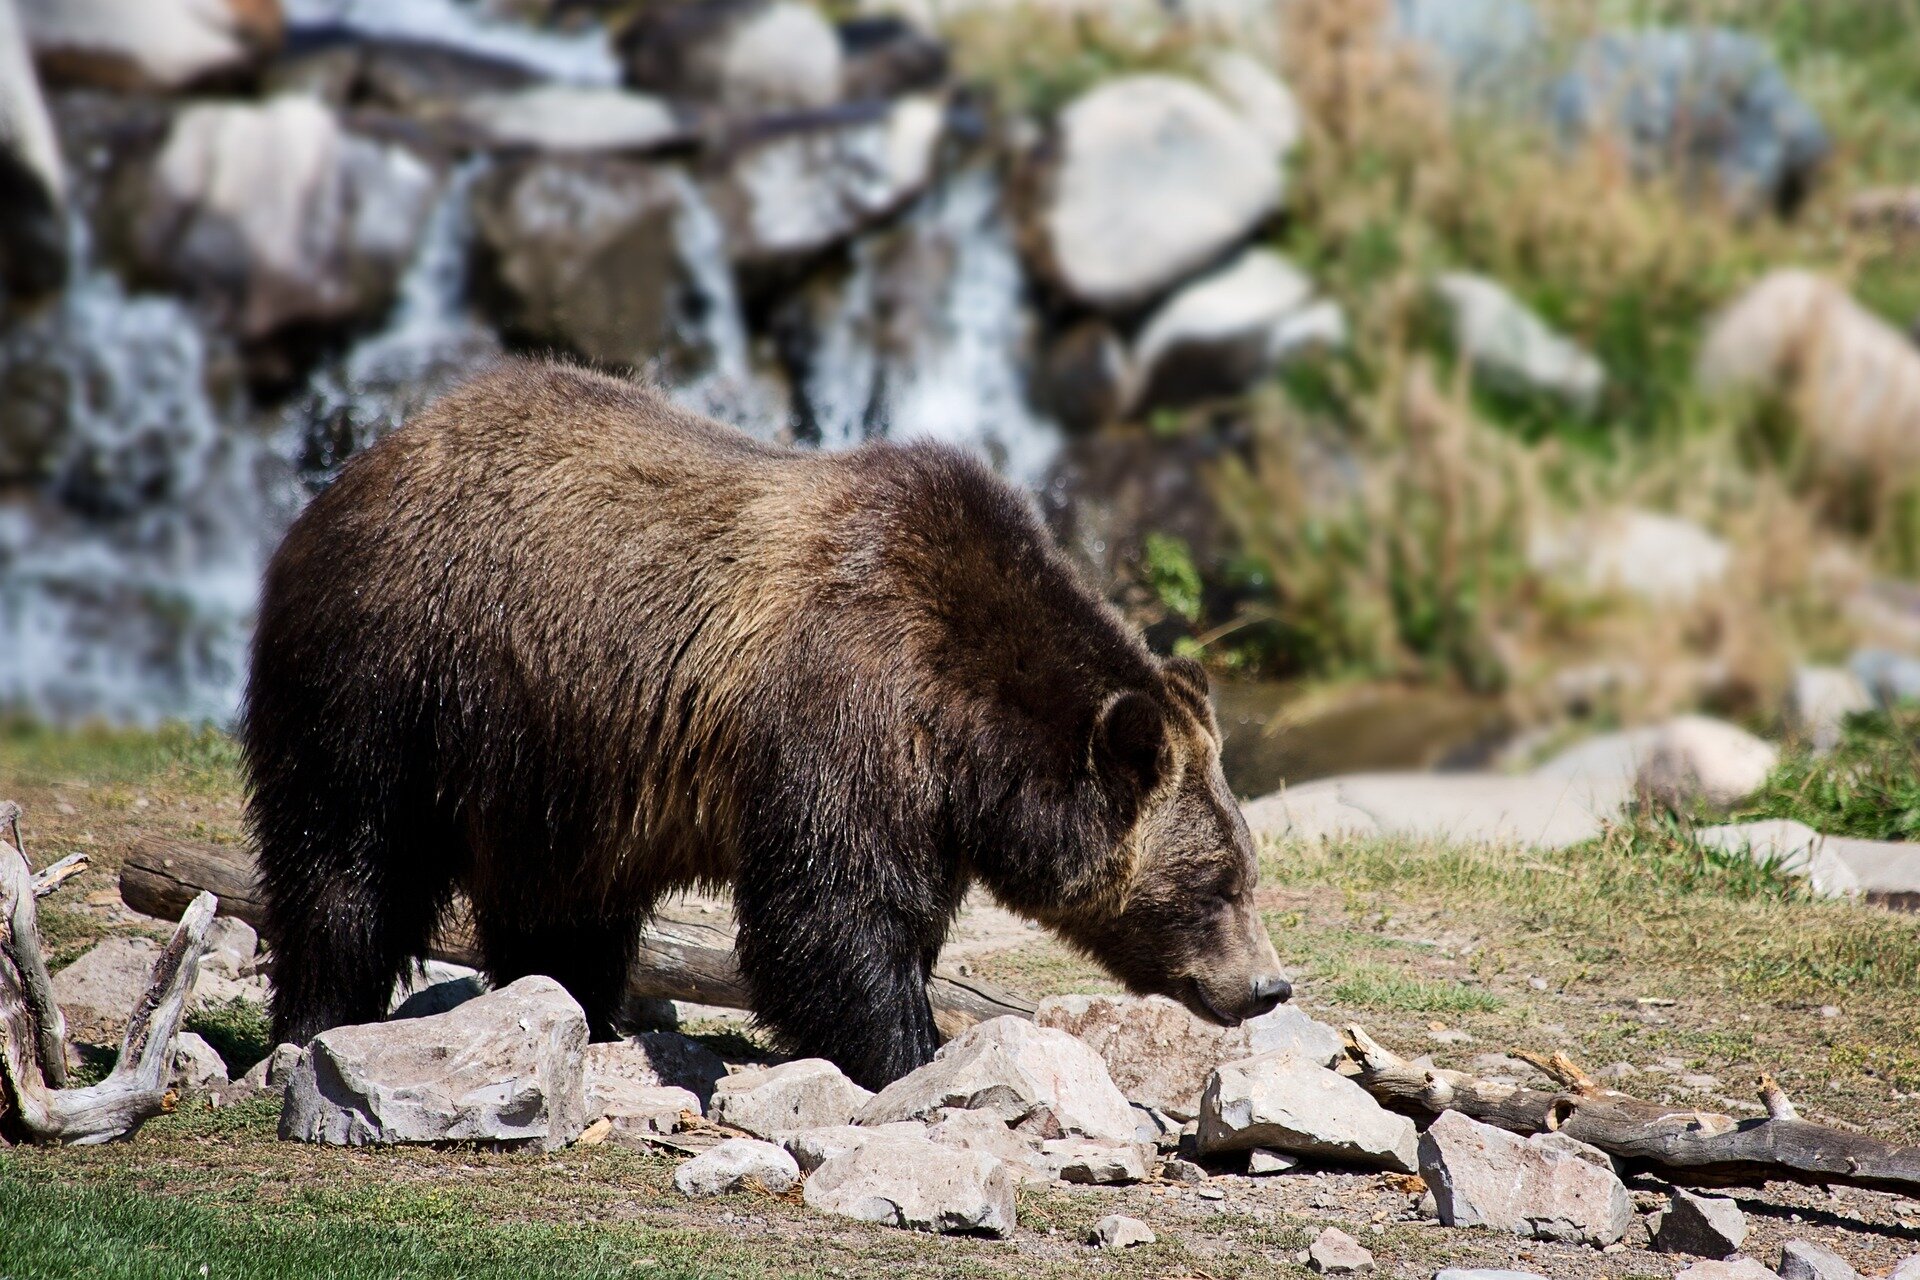 Grizzly bear conservation is as much about human relationships as it is the animals